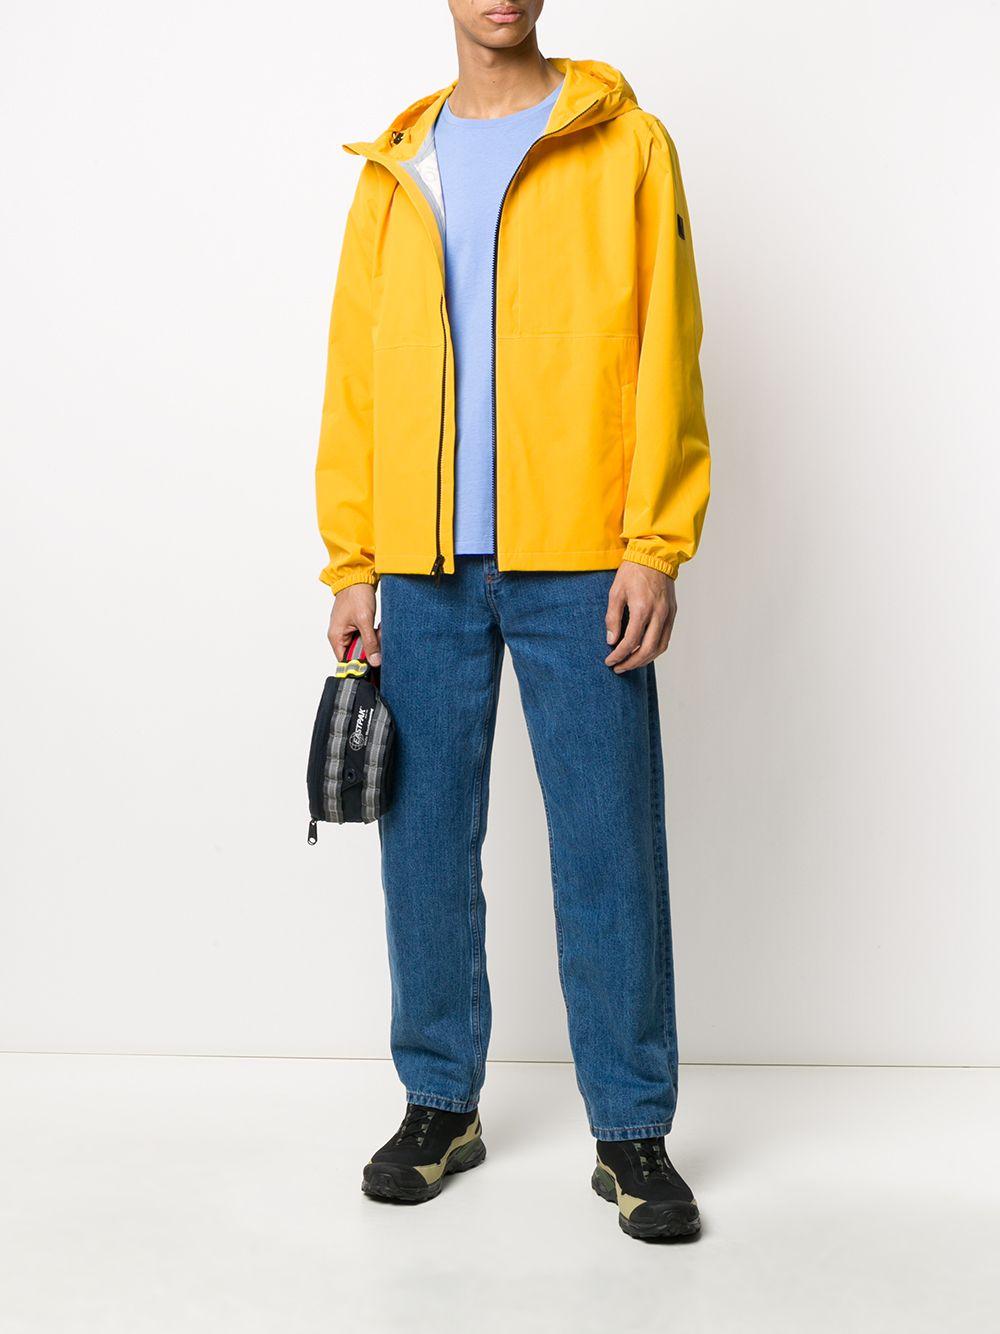 Woolrich Hooded Zip-up Jacket in Yellow for Men - Lyst